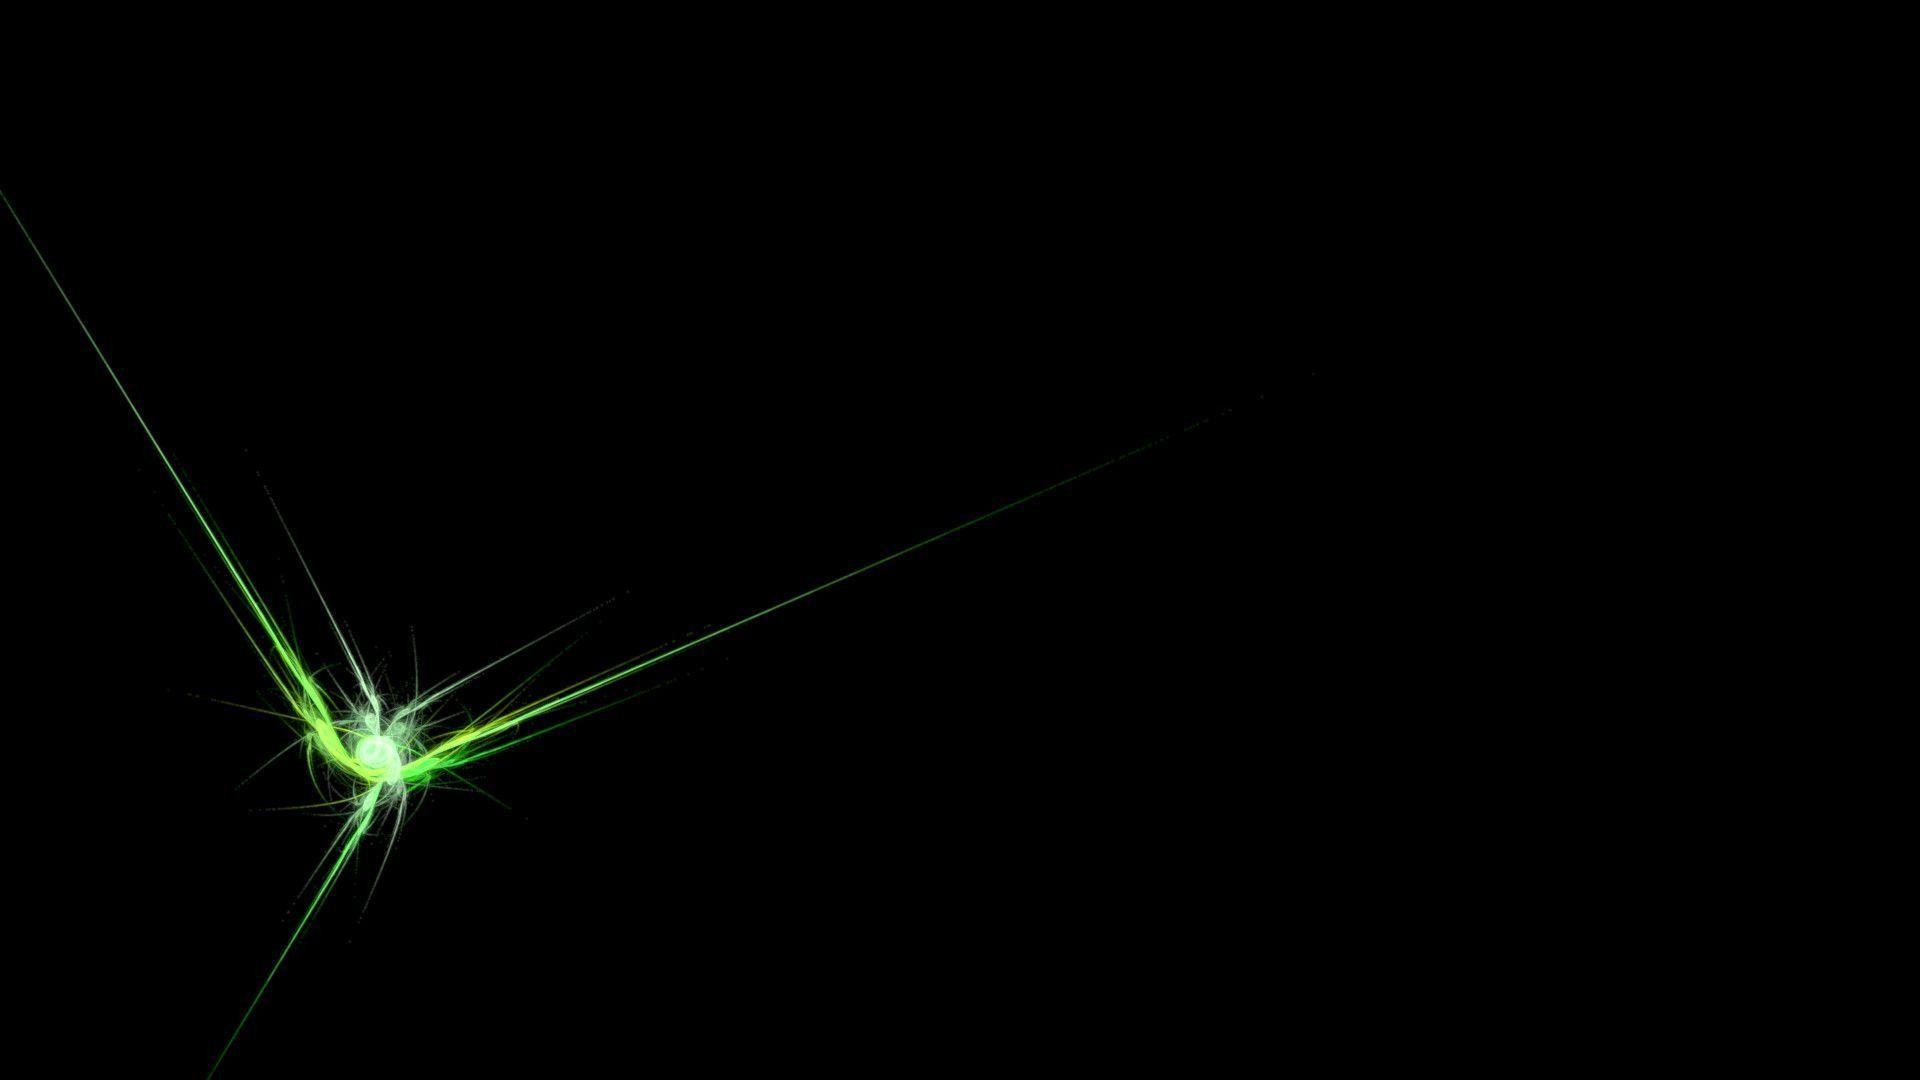 Wallpapers For > Black And Neon Green Backgrounds